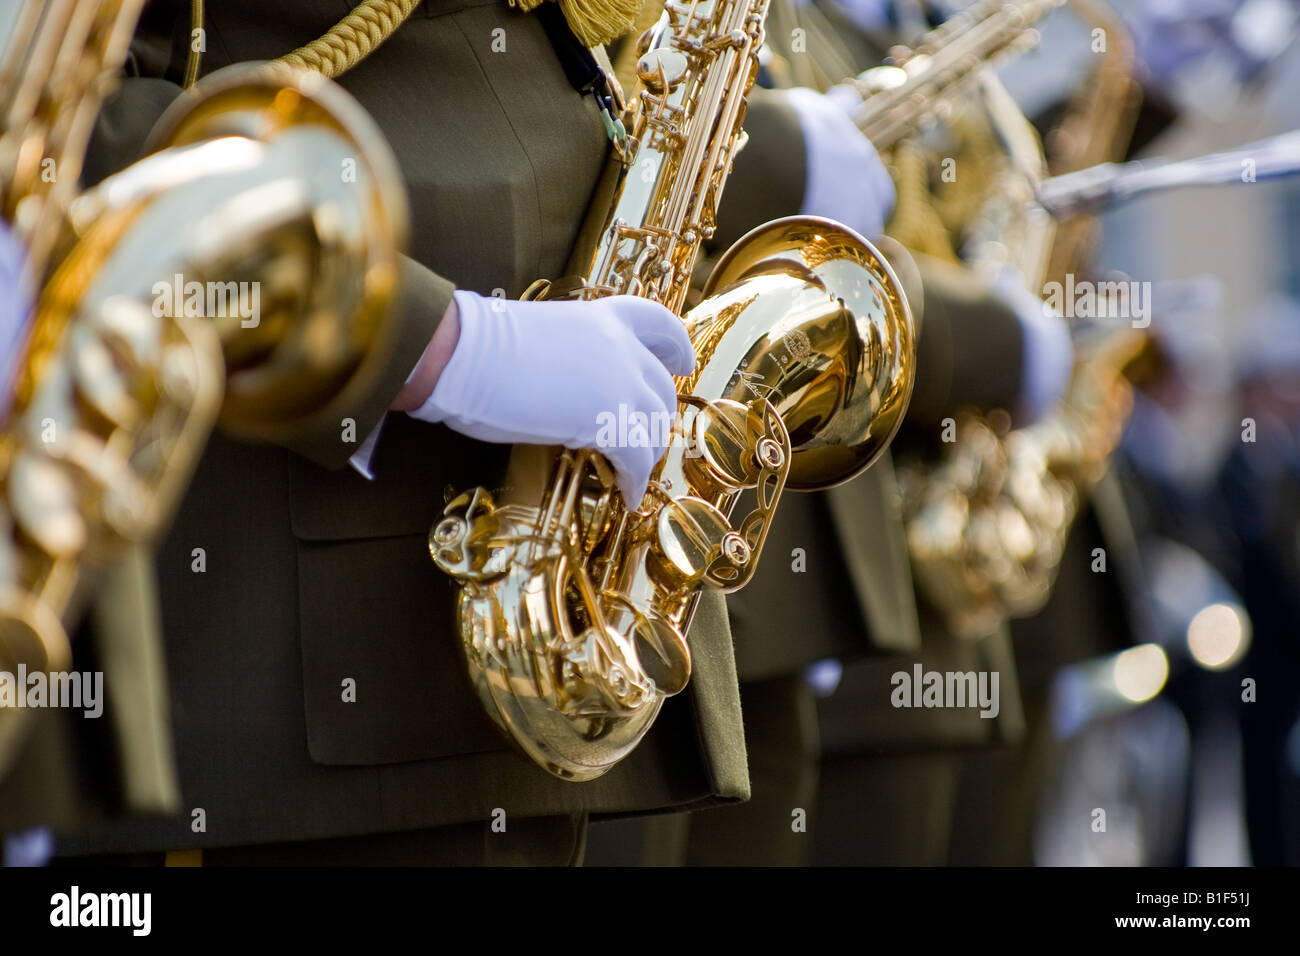 Lithuanian Armed Forces Band at the Military Bands Festival St Petersburg Russia 12 06 2008 Stock Photo